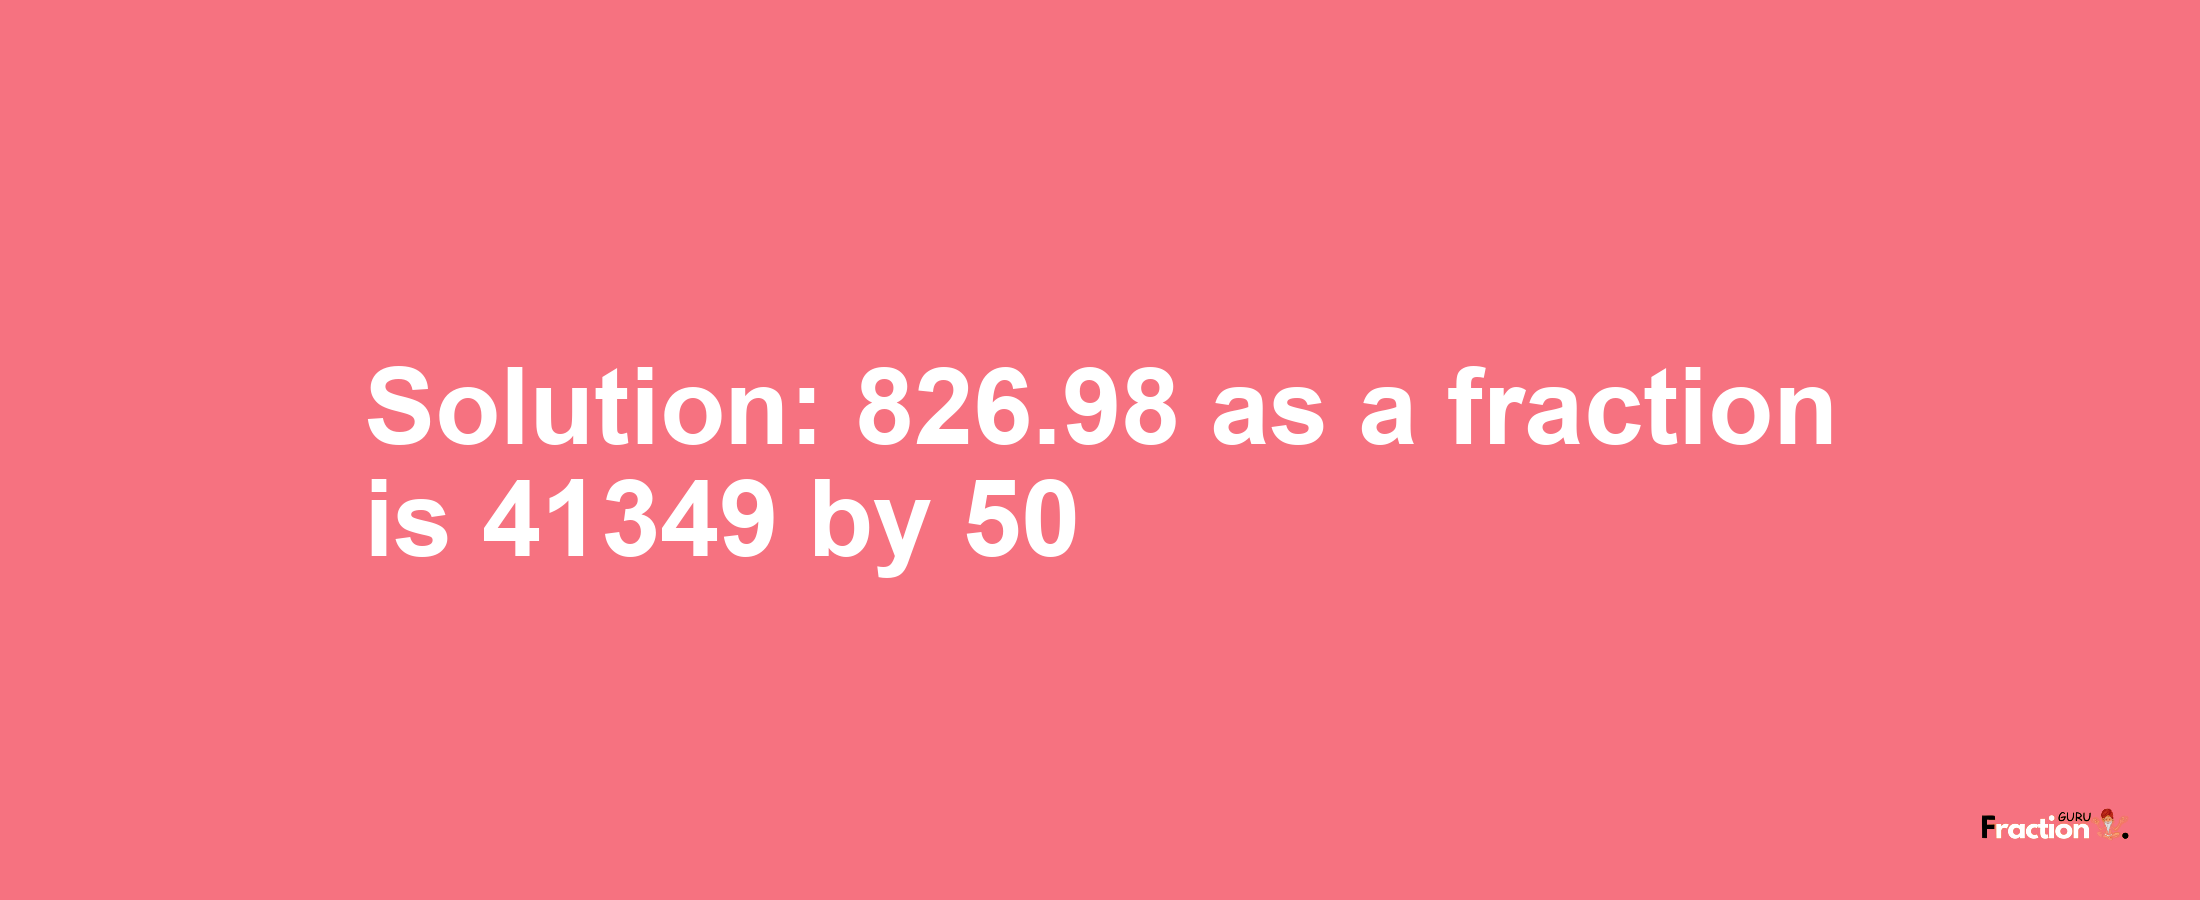 Solution:826.98 as a fraction is 41349/50